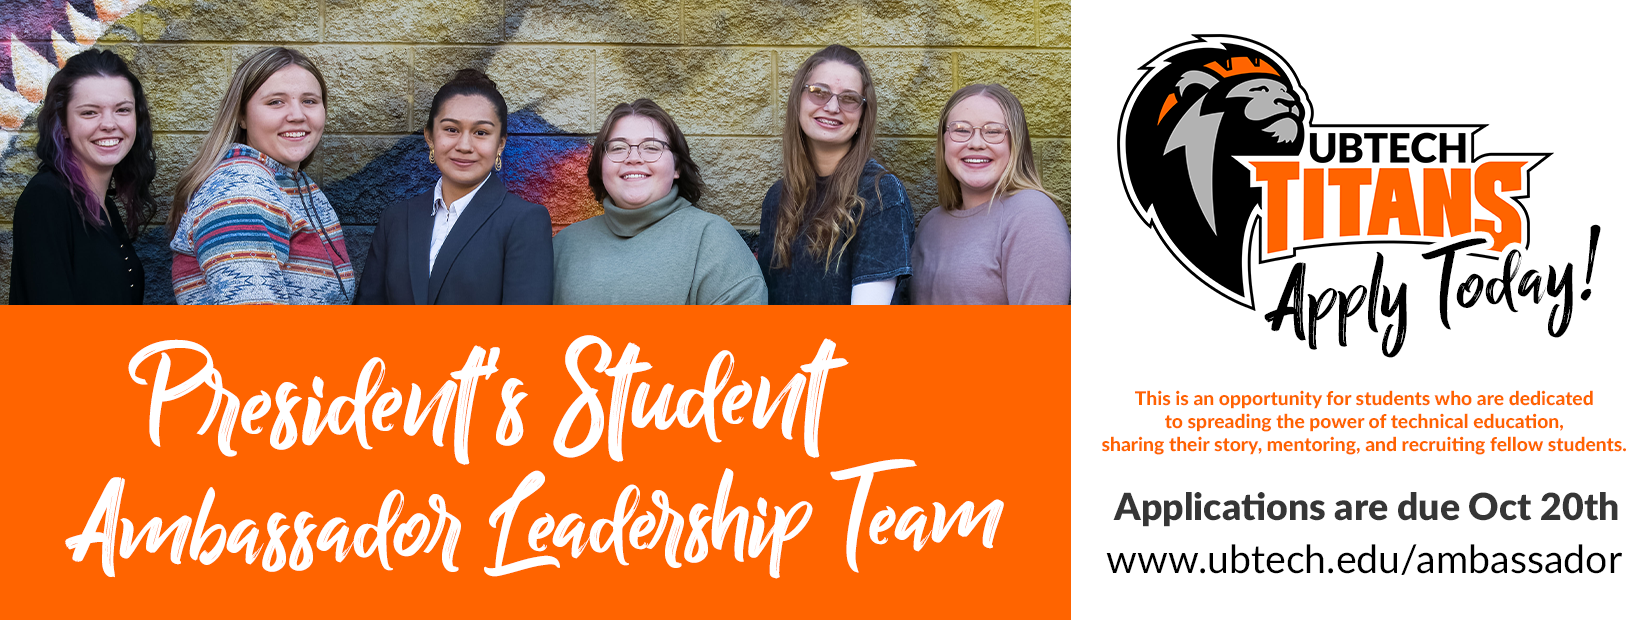 President's Student Ambassador Leadership Team. Applications due October 20th. This is an opportunity for students who are dedicated  to spreading the power of technical education, sharing their story, mentoring, and recruiting fellow students. 